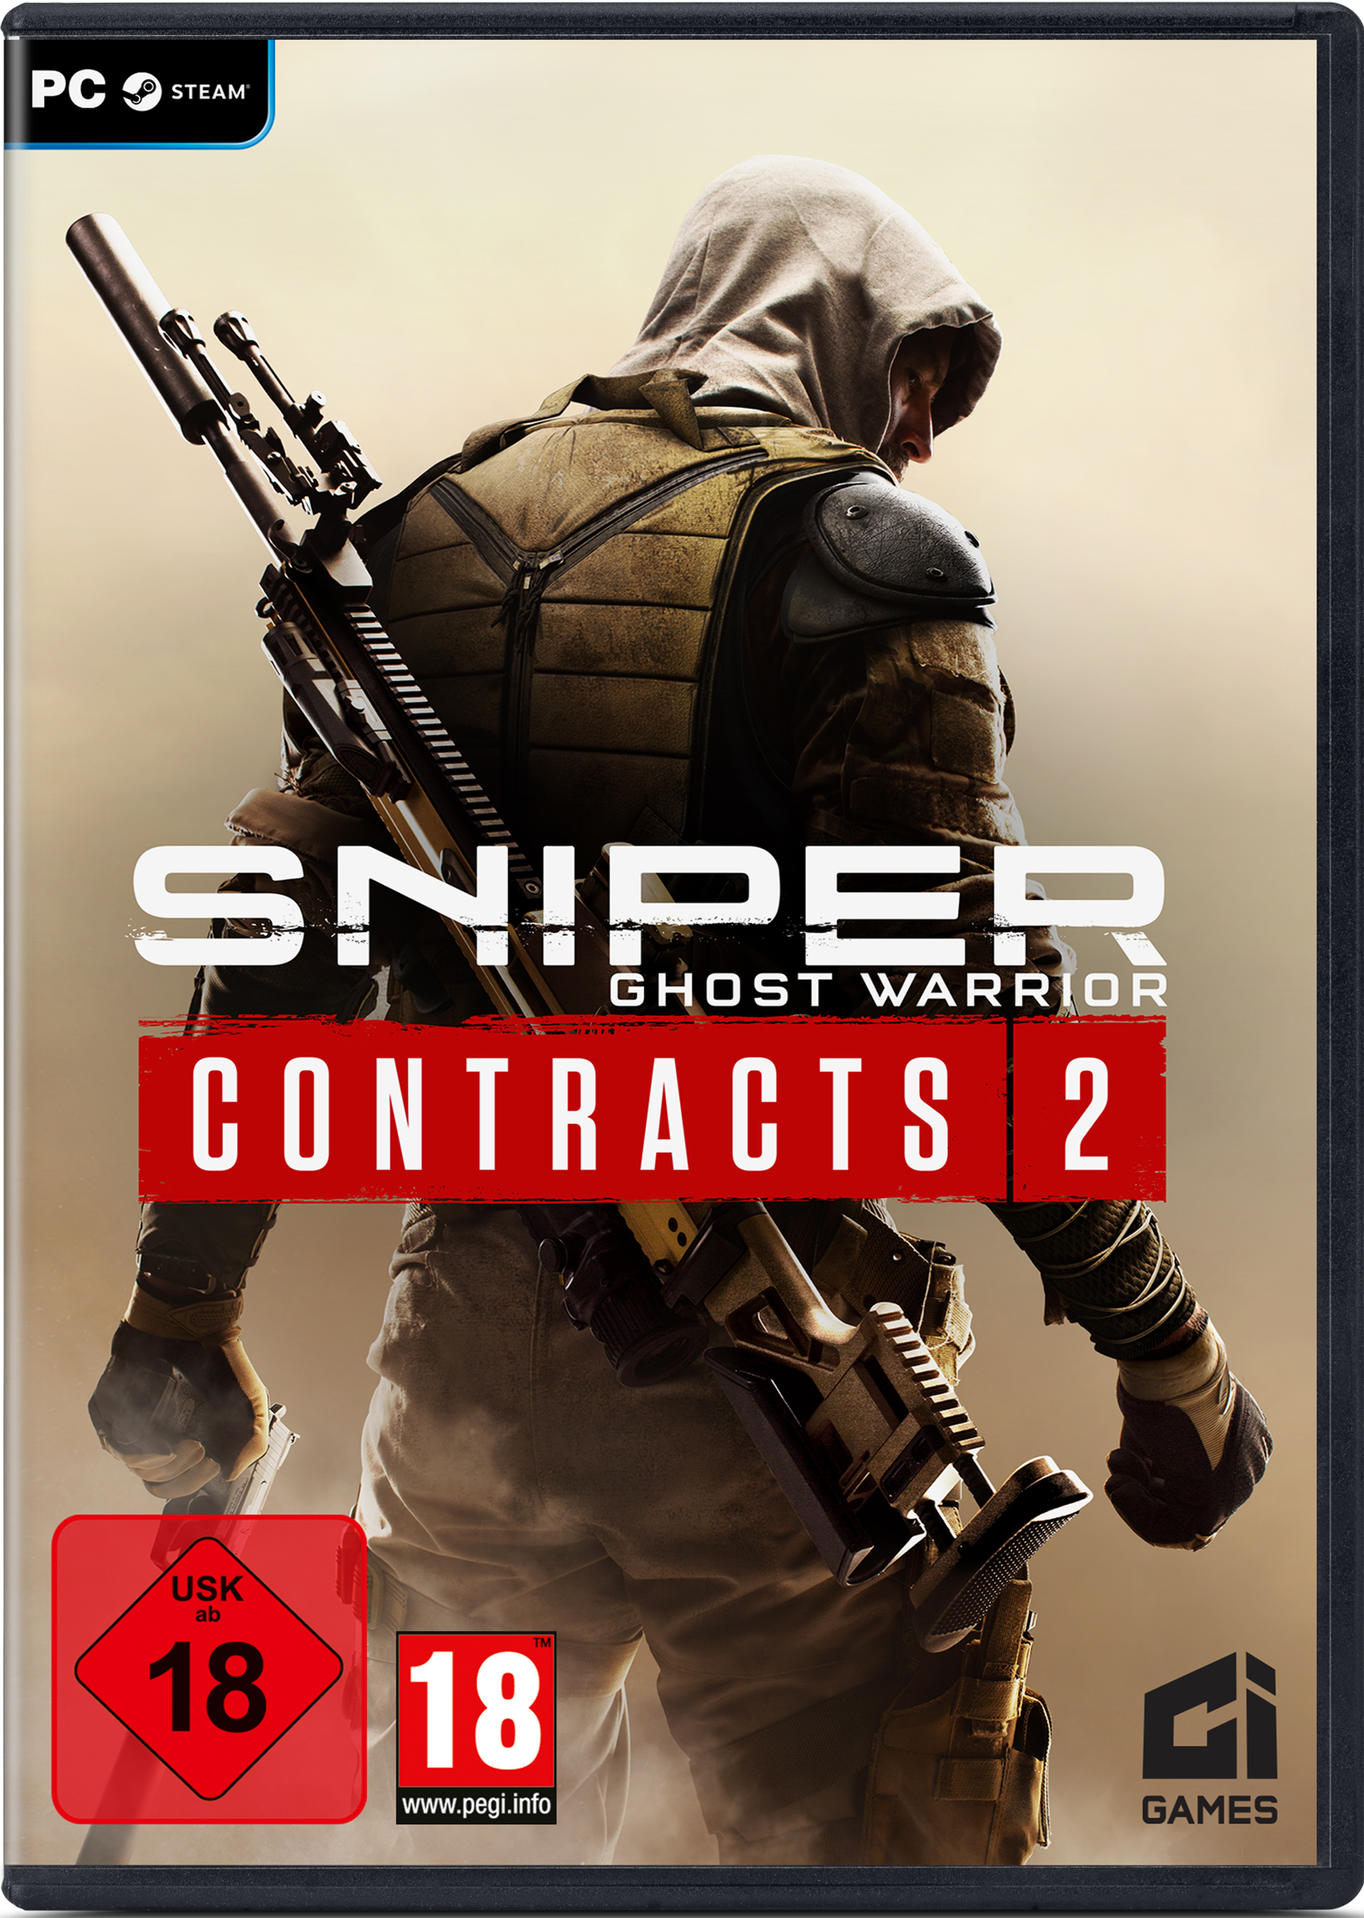 GHOST SNIPER WARRIOR [PC] - 2 CONTRACTS